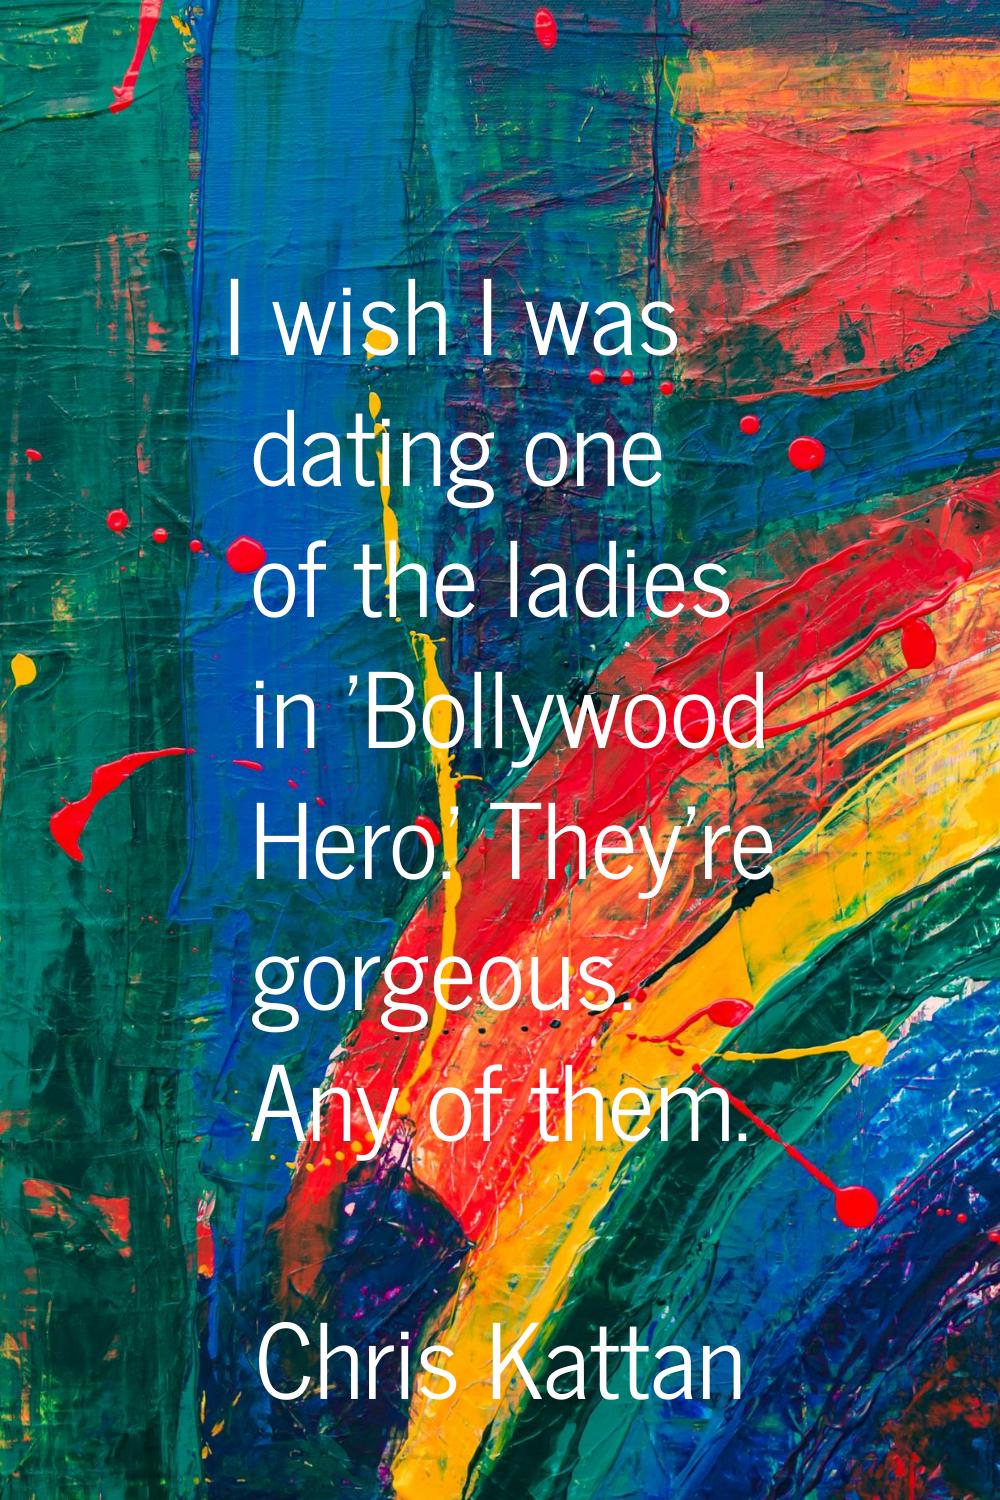 I wish I was dating one of the ladies in 'Bollywood Hero.' They're gorgeous. Any of them.